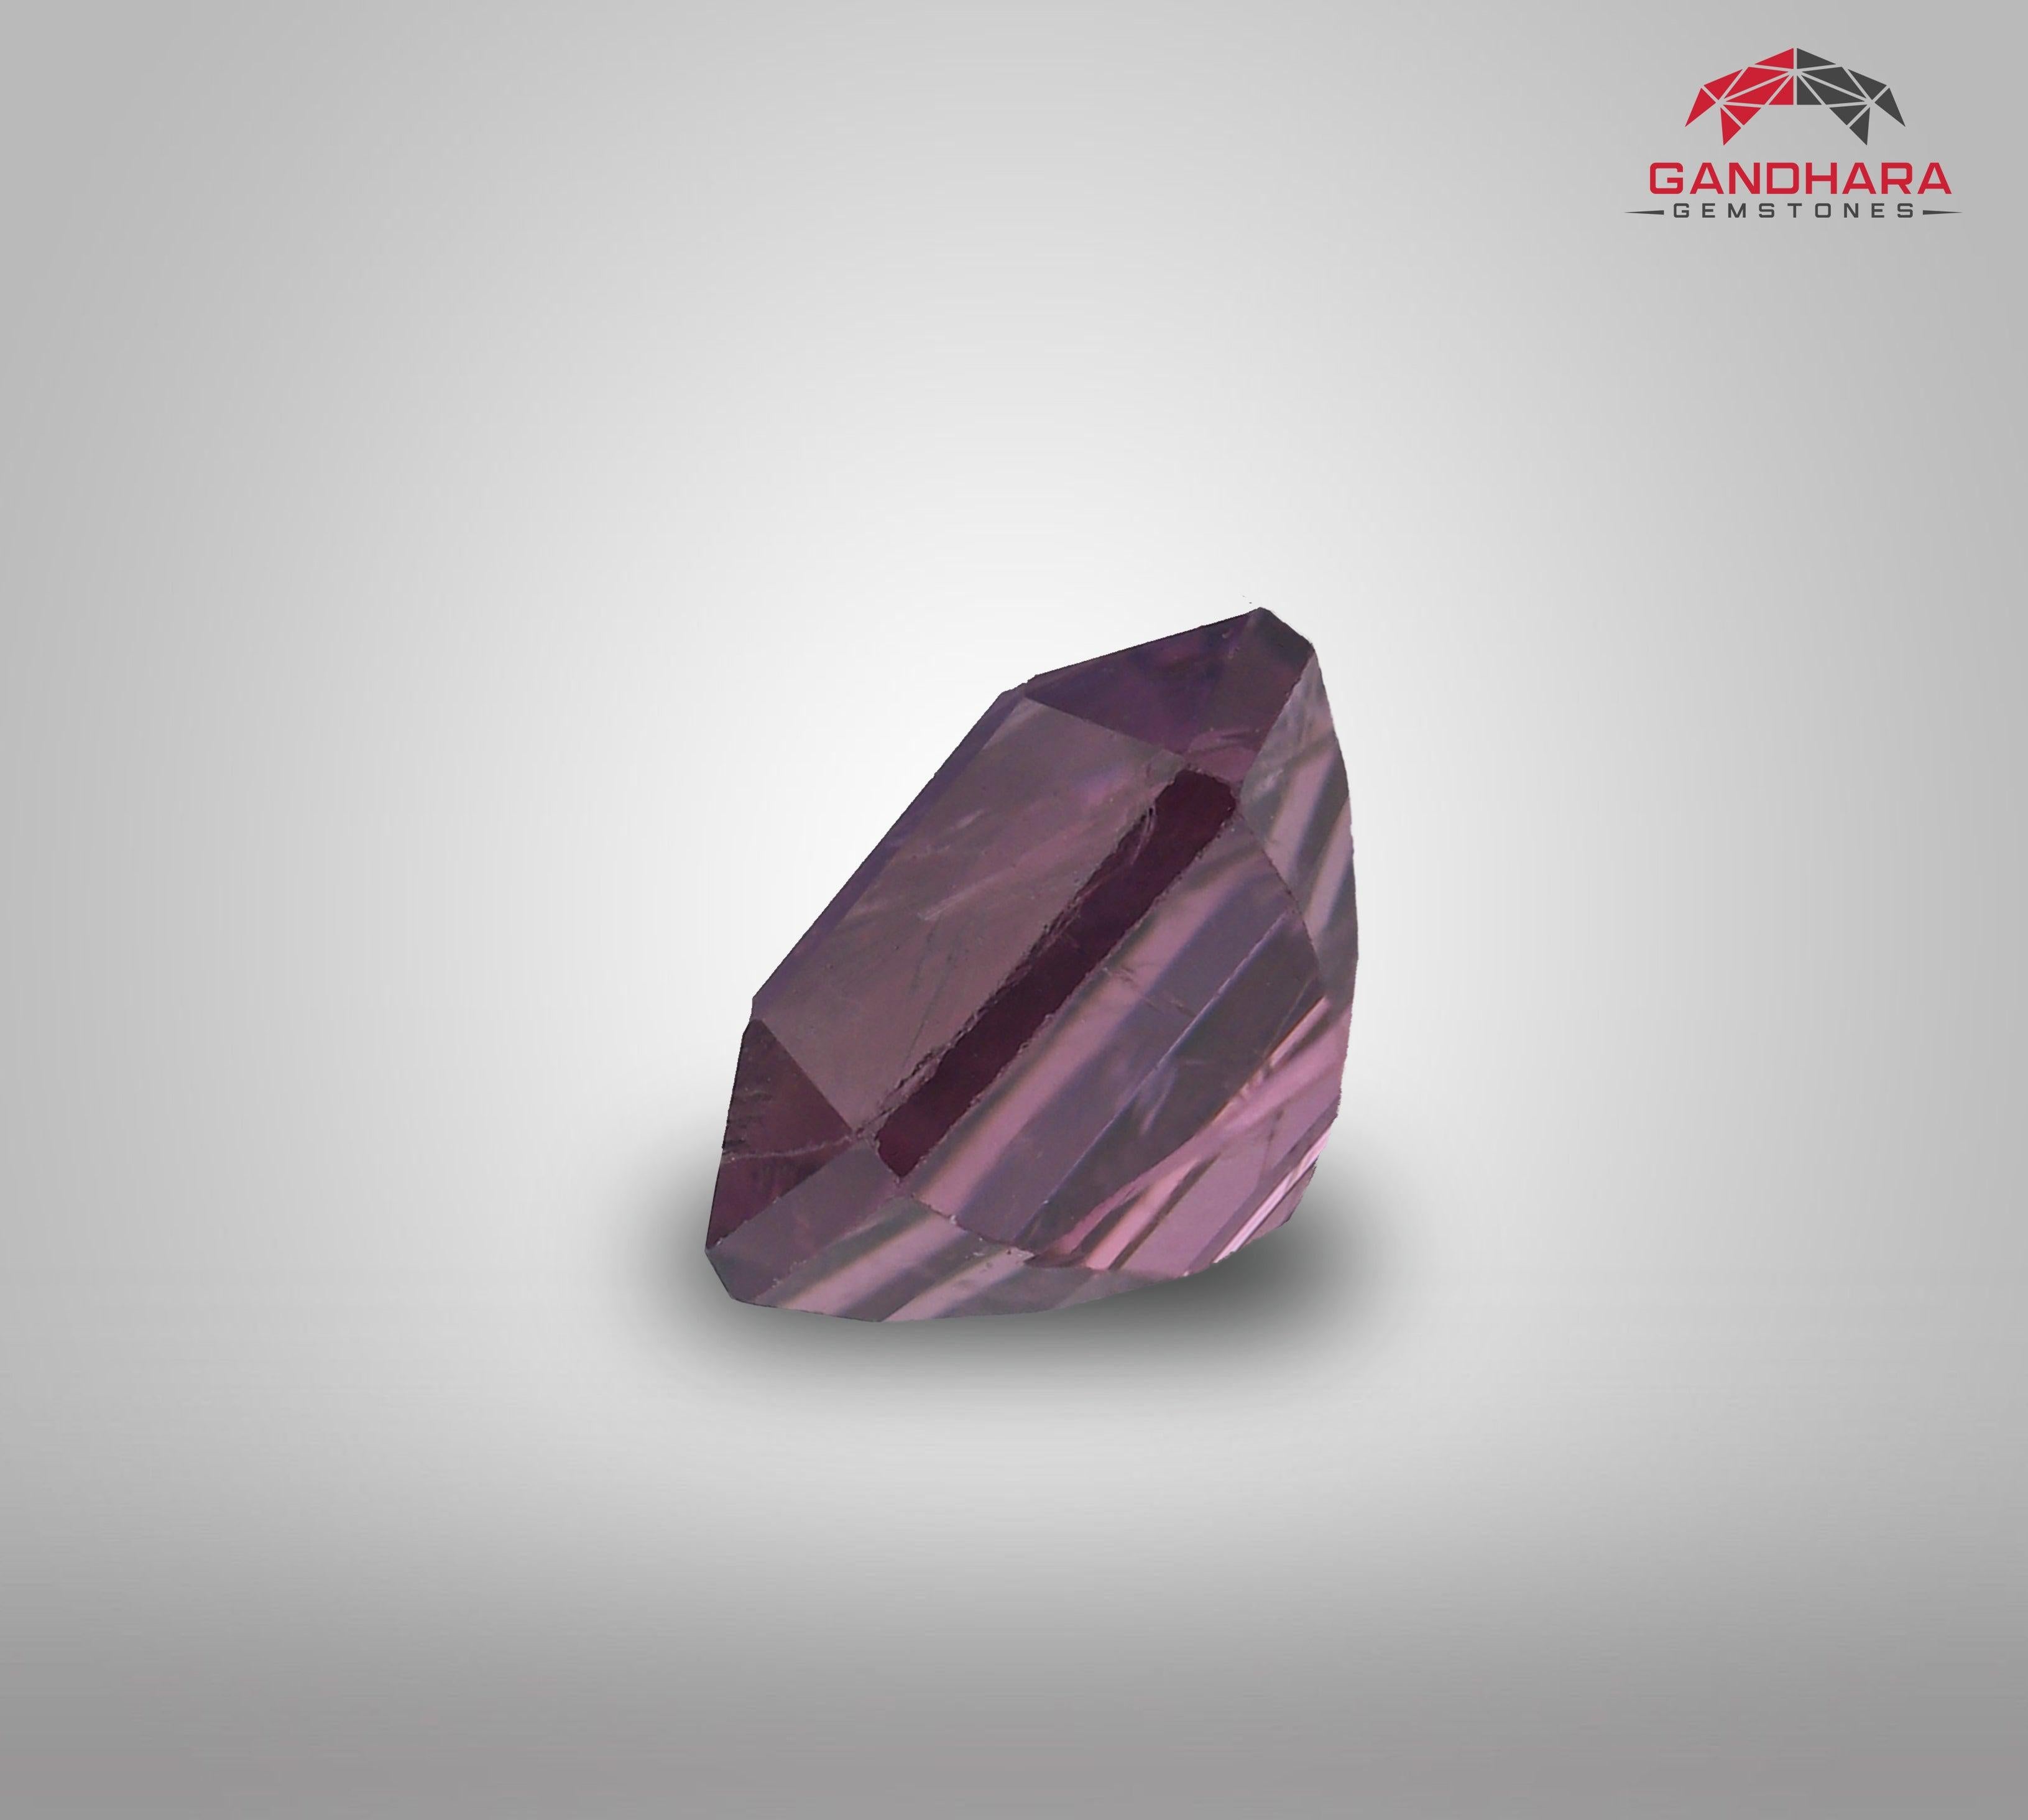 Natural Purple Cut Spinel Gem, available for sale at wholesale price, natural high-quality, 1.20 carats Loose certified Purple Spinel gemstone from Burma.

Product Information:
GEMSTONE TYPE	Natural Purple Cut Spinel Gem
WEIGHT	1.20